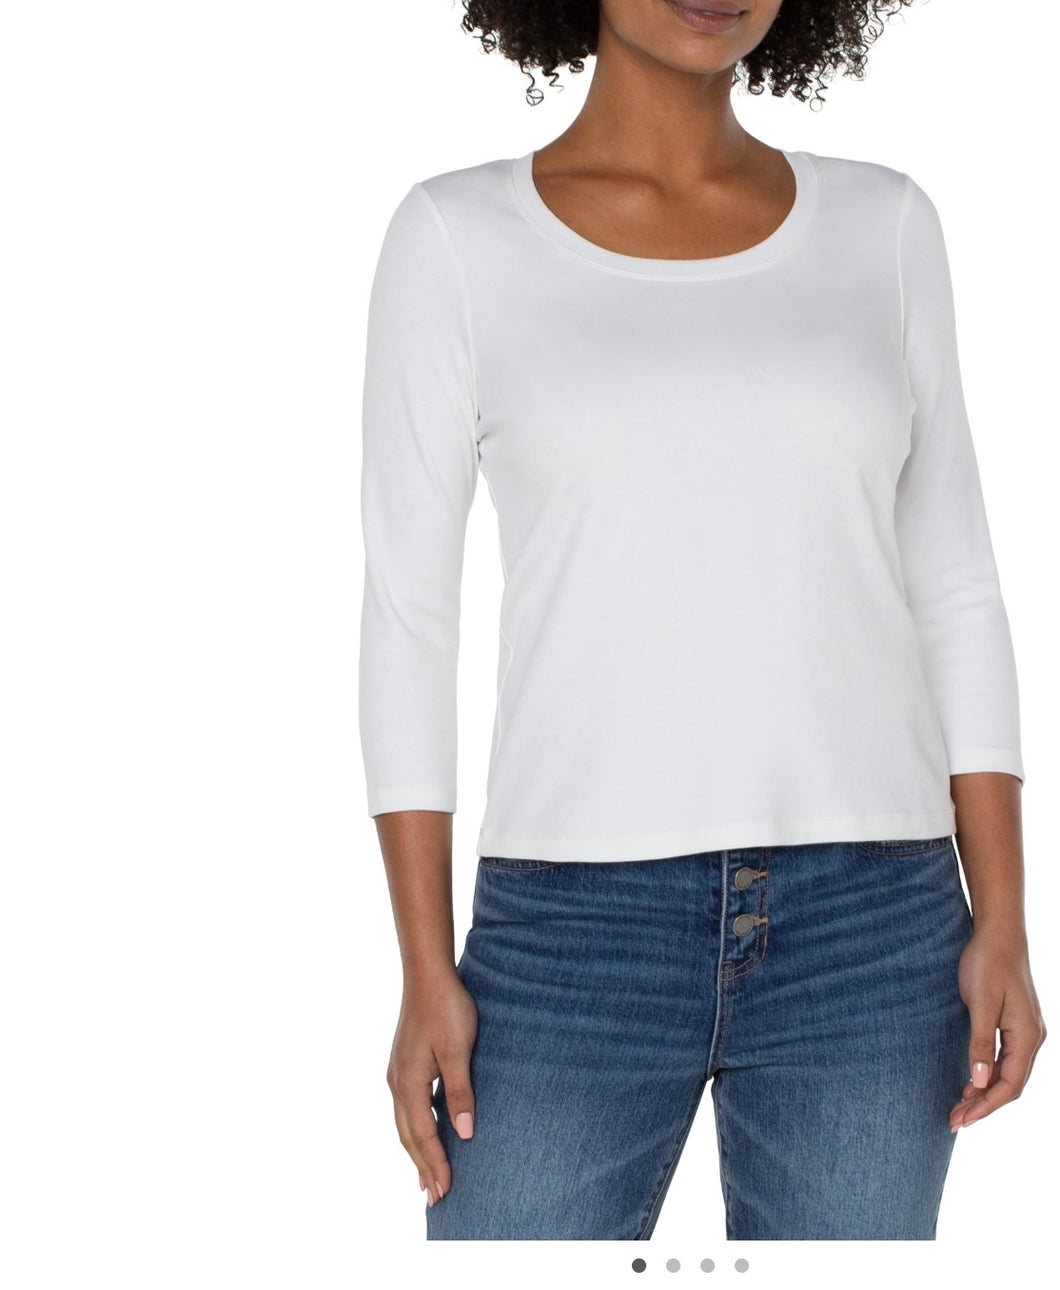 Liverpool: 3/4 Sleeve Scoop Neck Knit Tee in White